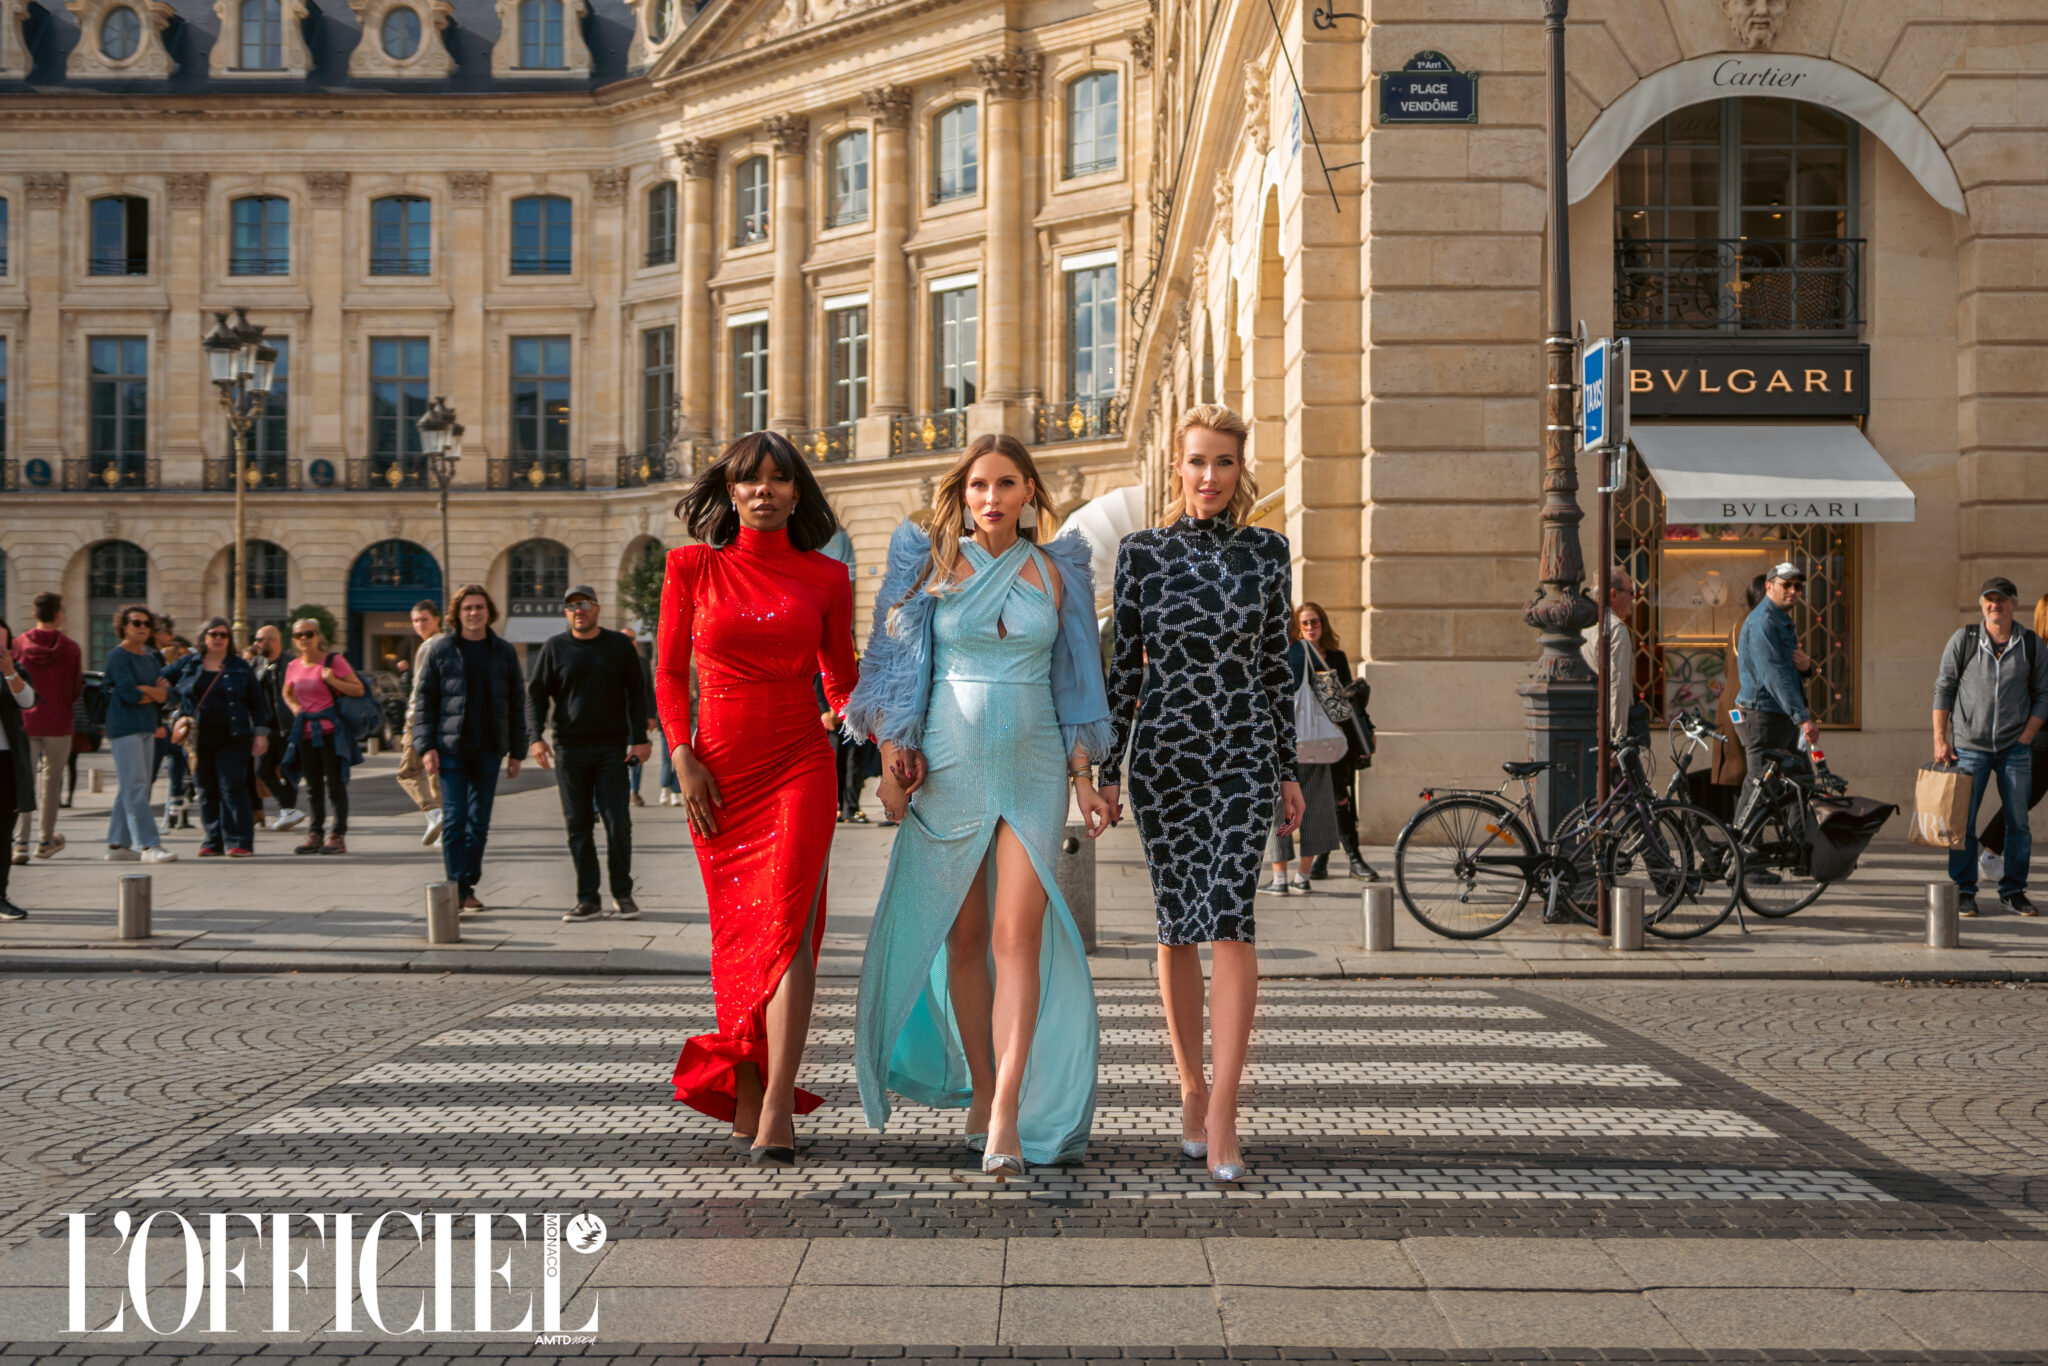 Feature at L'Officiel Monaco during Paris Fashion Week SS 23. Visual Fashion Story from the magical Paris. Featuring: Nicolas Besson, Gemy Maalouf, Charriol, Sol Angelann and more. 49